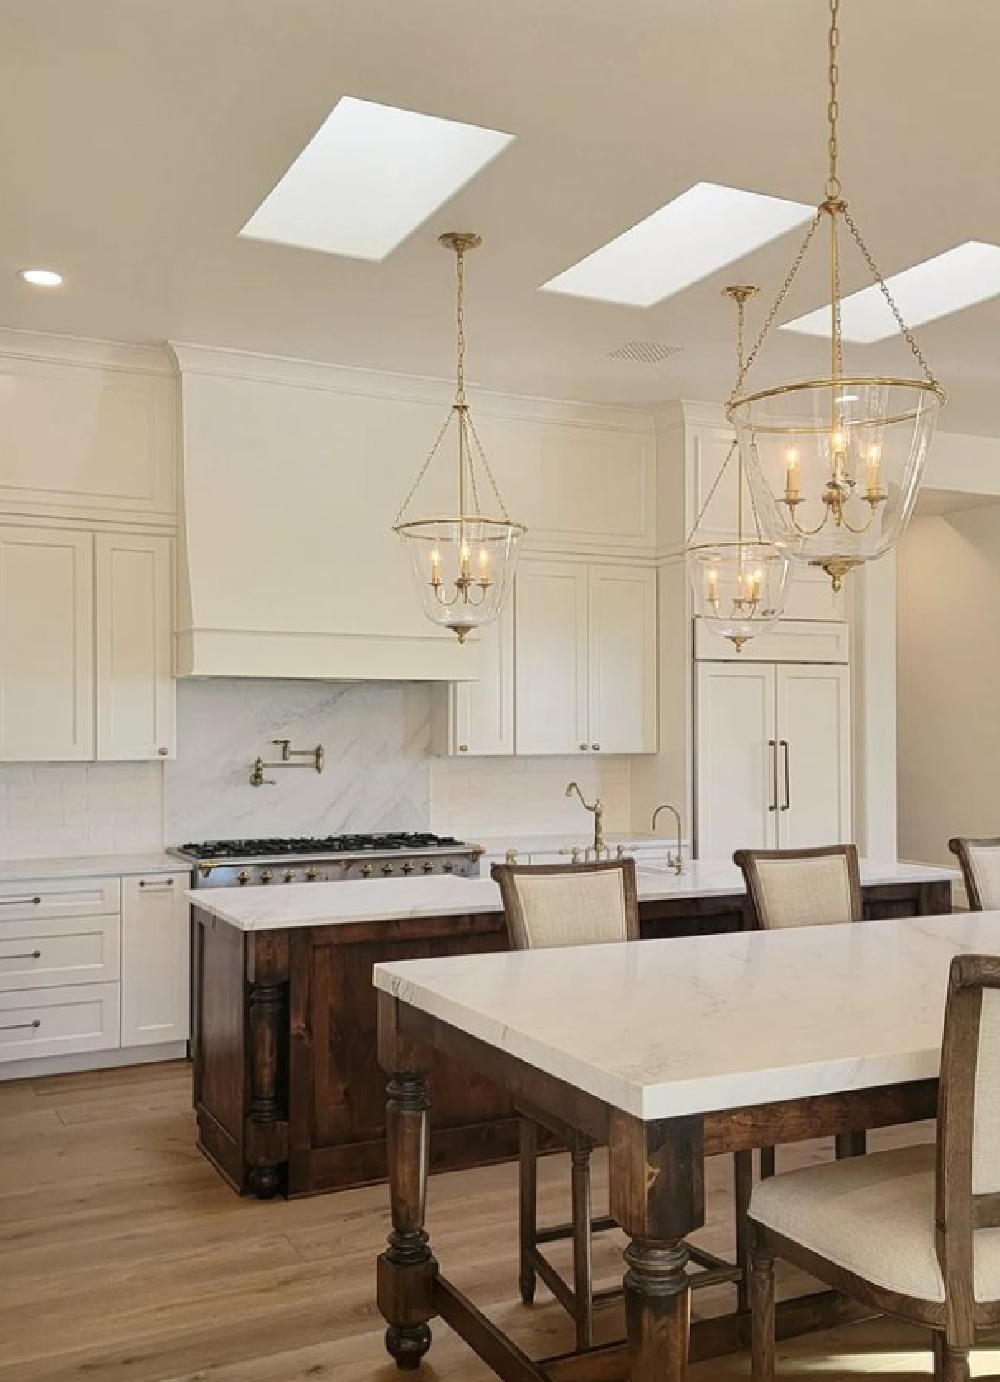 Elegant white French inspired kitchen with skylights, lofty ceilings, and rich details - TheFrenchNestCoInteriorDesign. #frenchkitchens